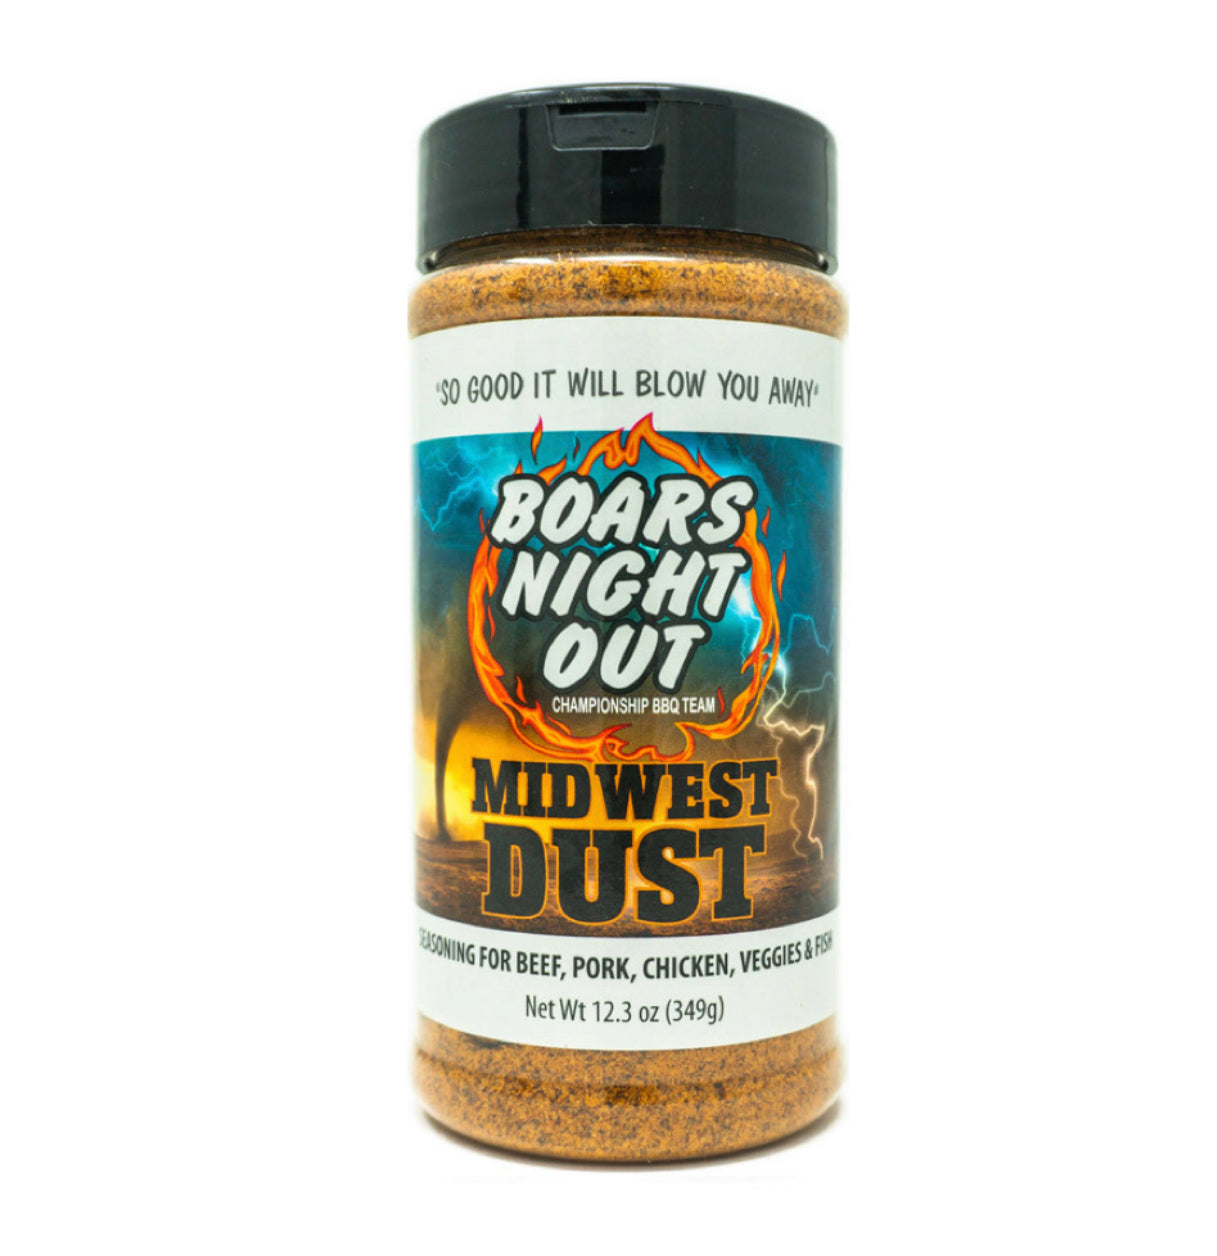 Boars Night Out “Midwest Dust”